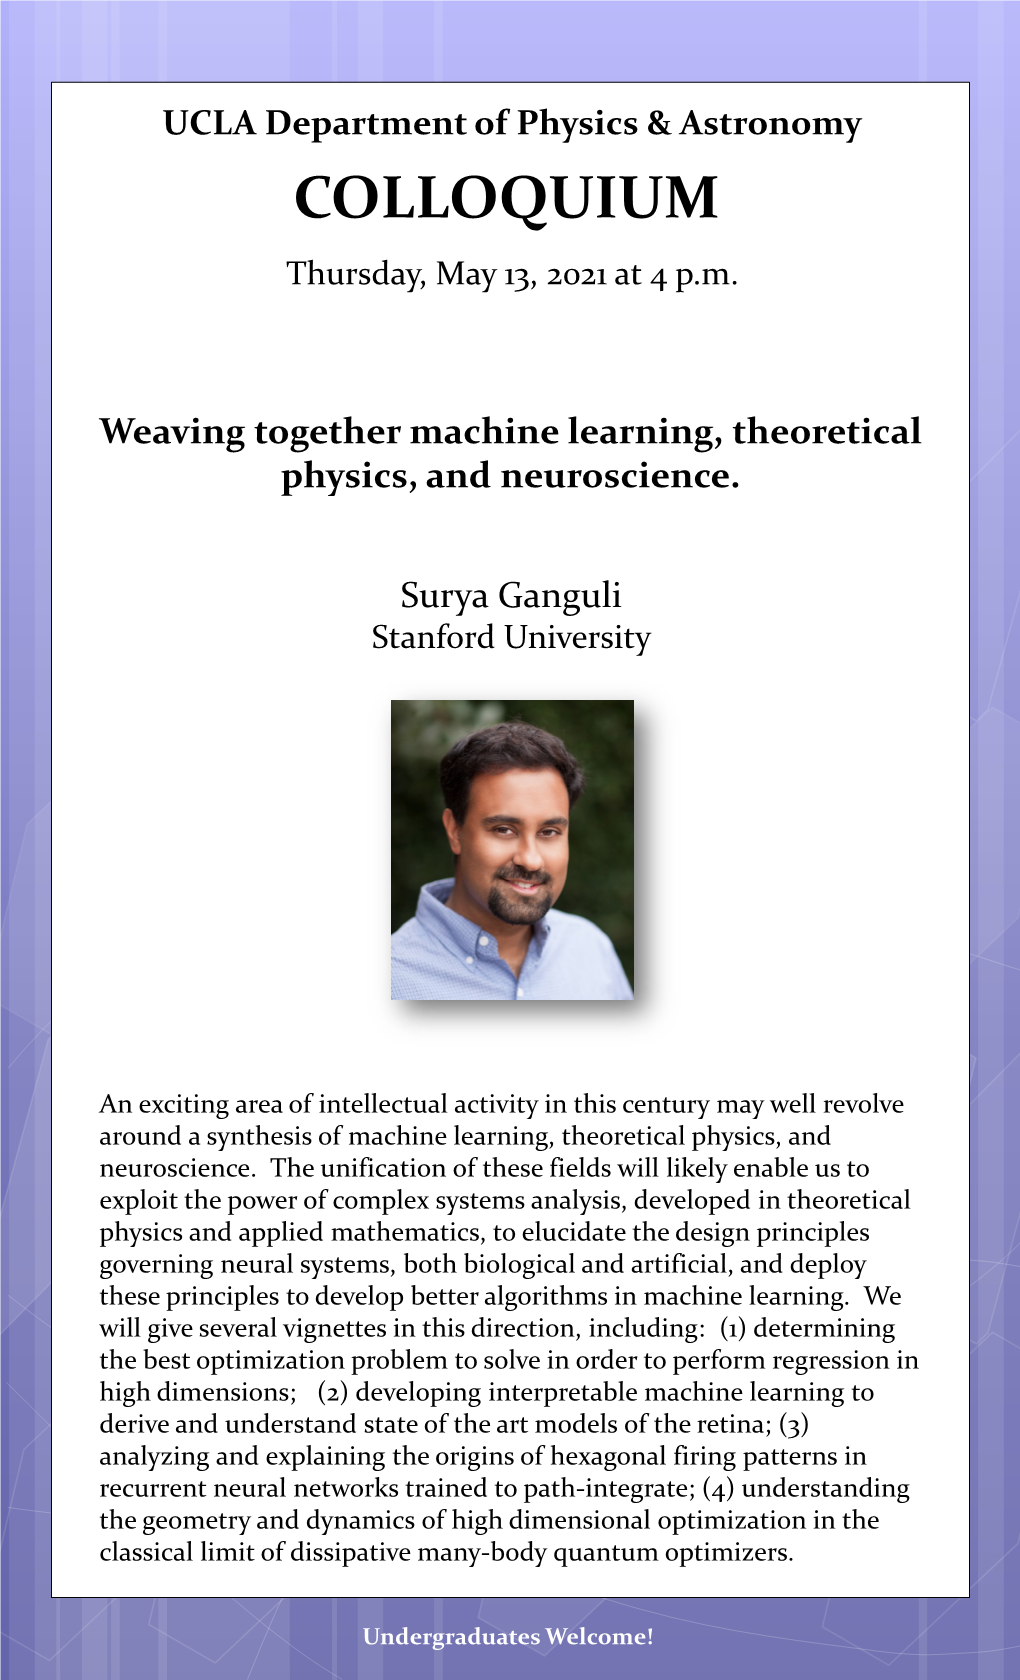 Weaving Together Machine Learning, Theoretical Physics, and Neuroscience